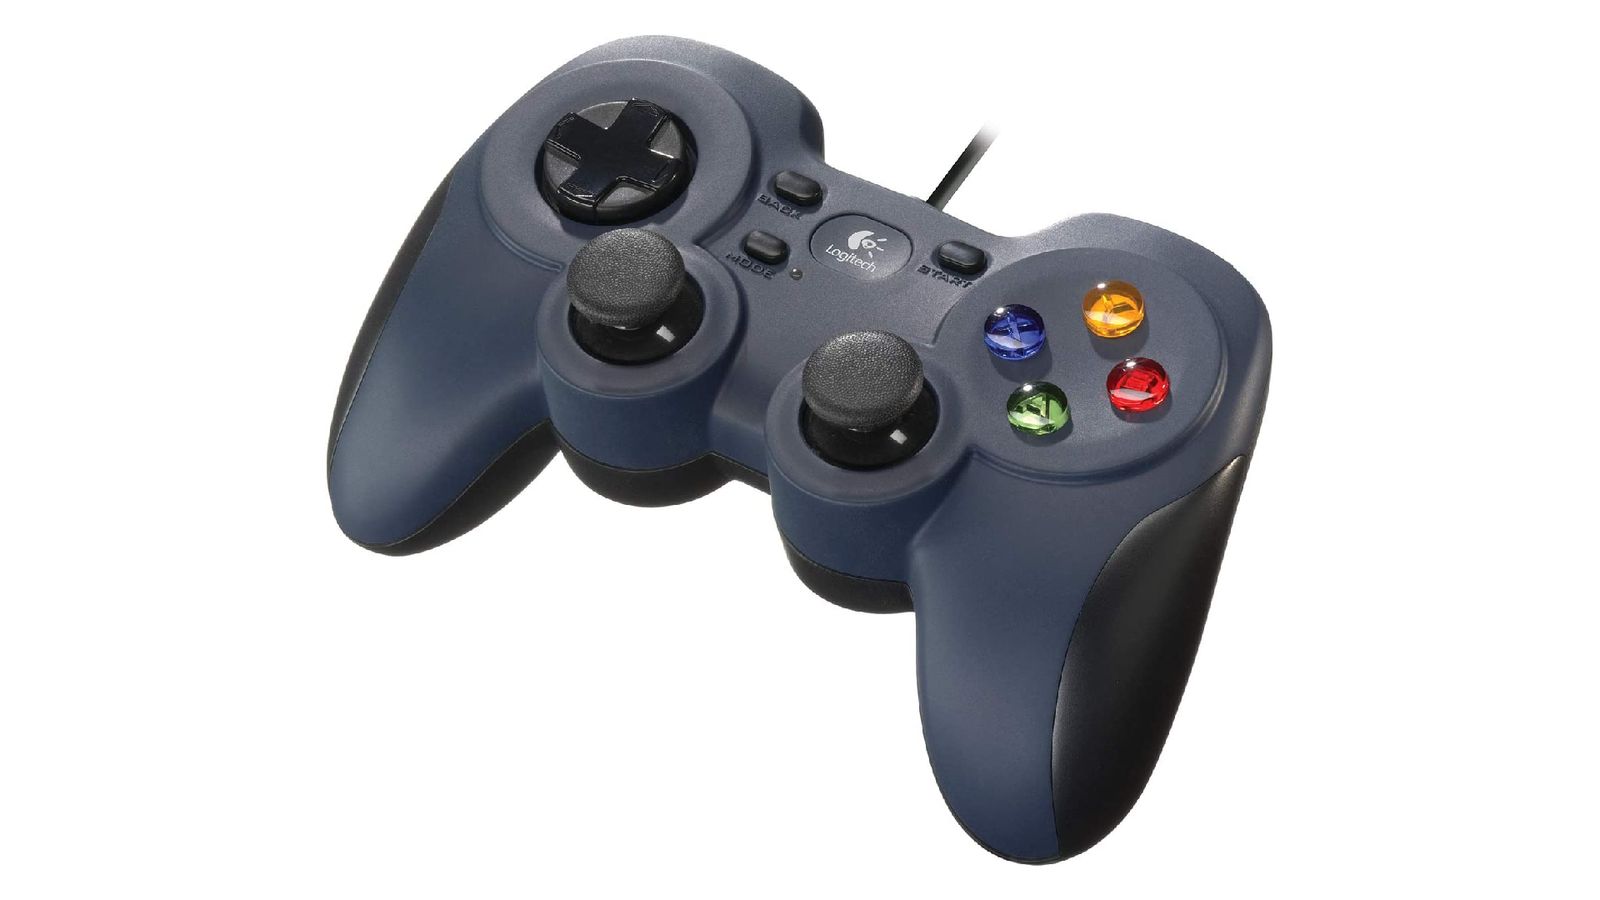 Logitech F310 product image of a small grey and black controller with multicoloured action buttons.